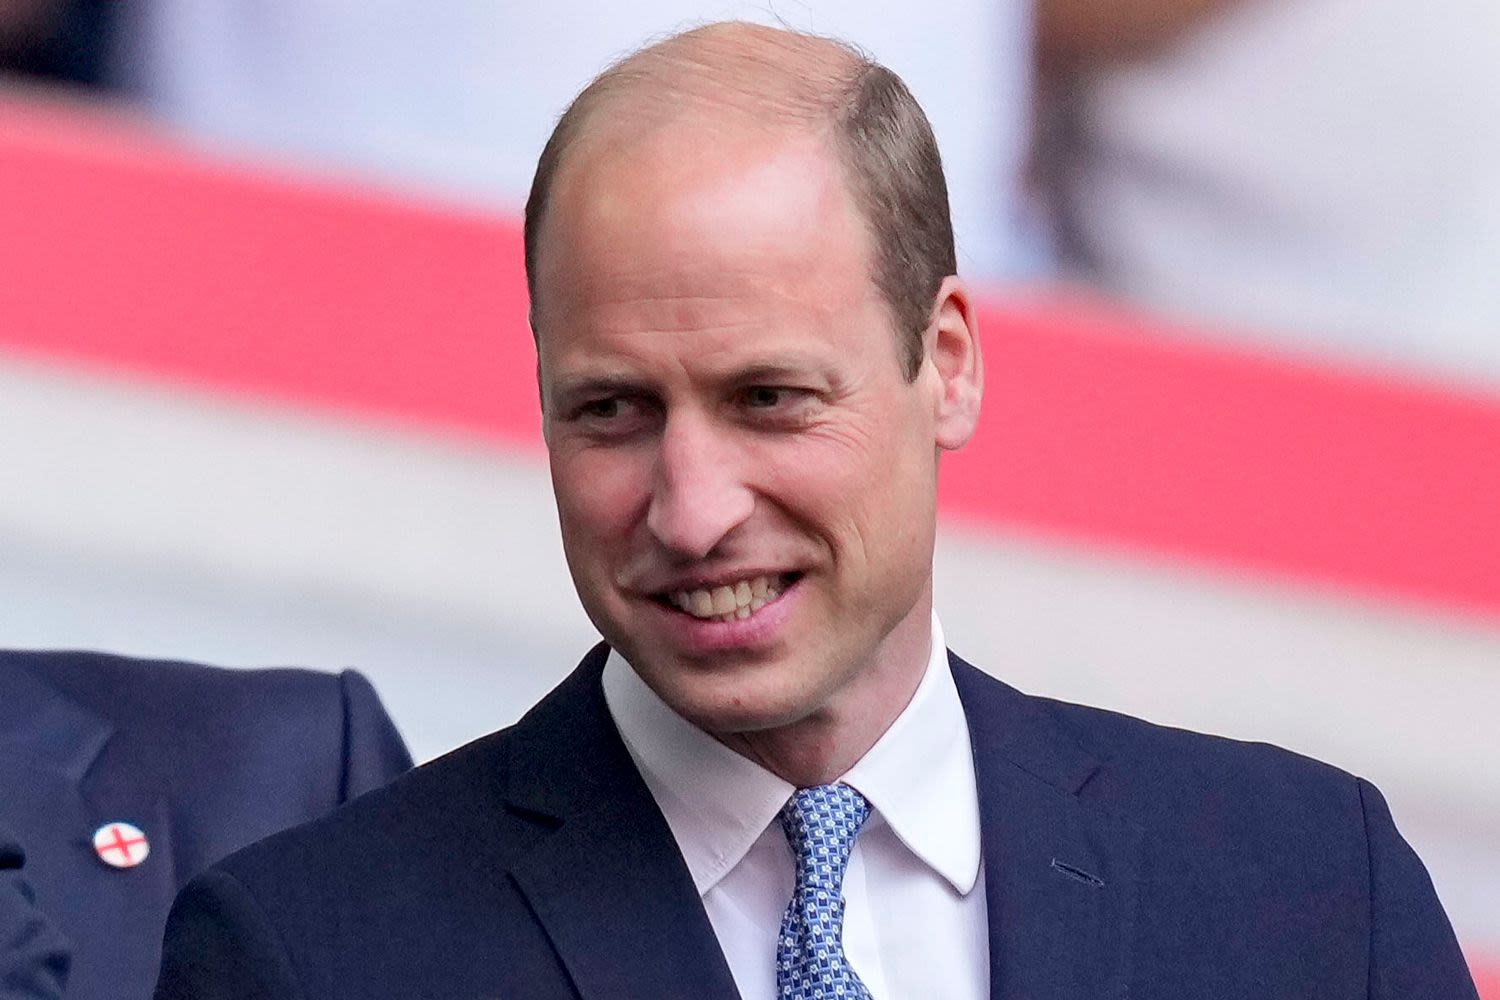 Prince William Spotted Wearing Fitness Tracker, But He's Not the First Royal to Try the Trend